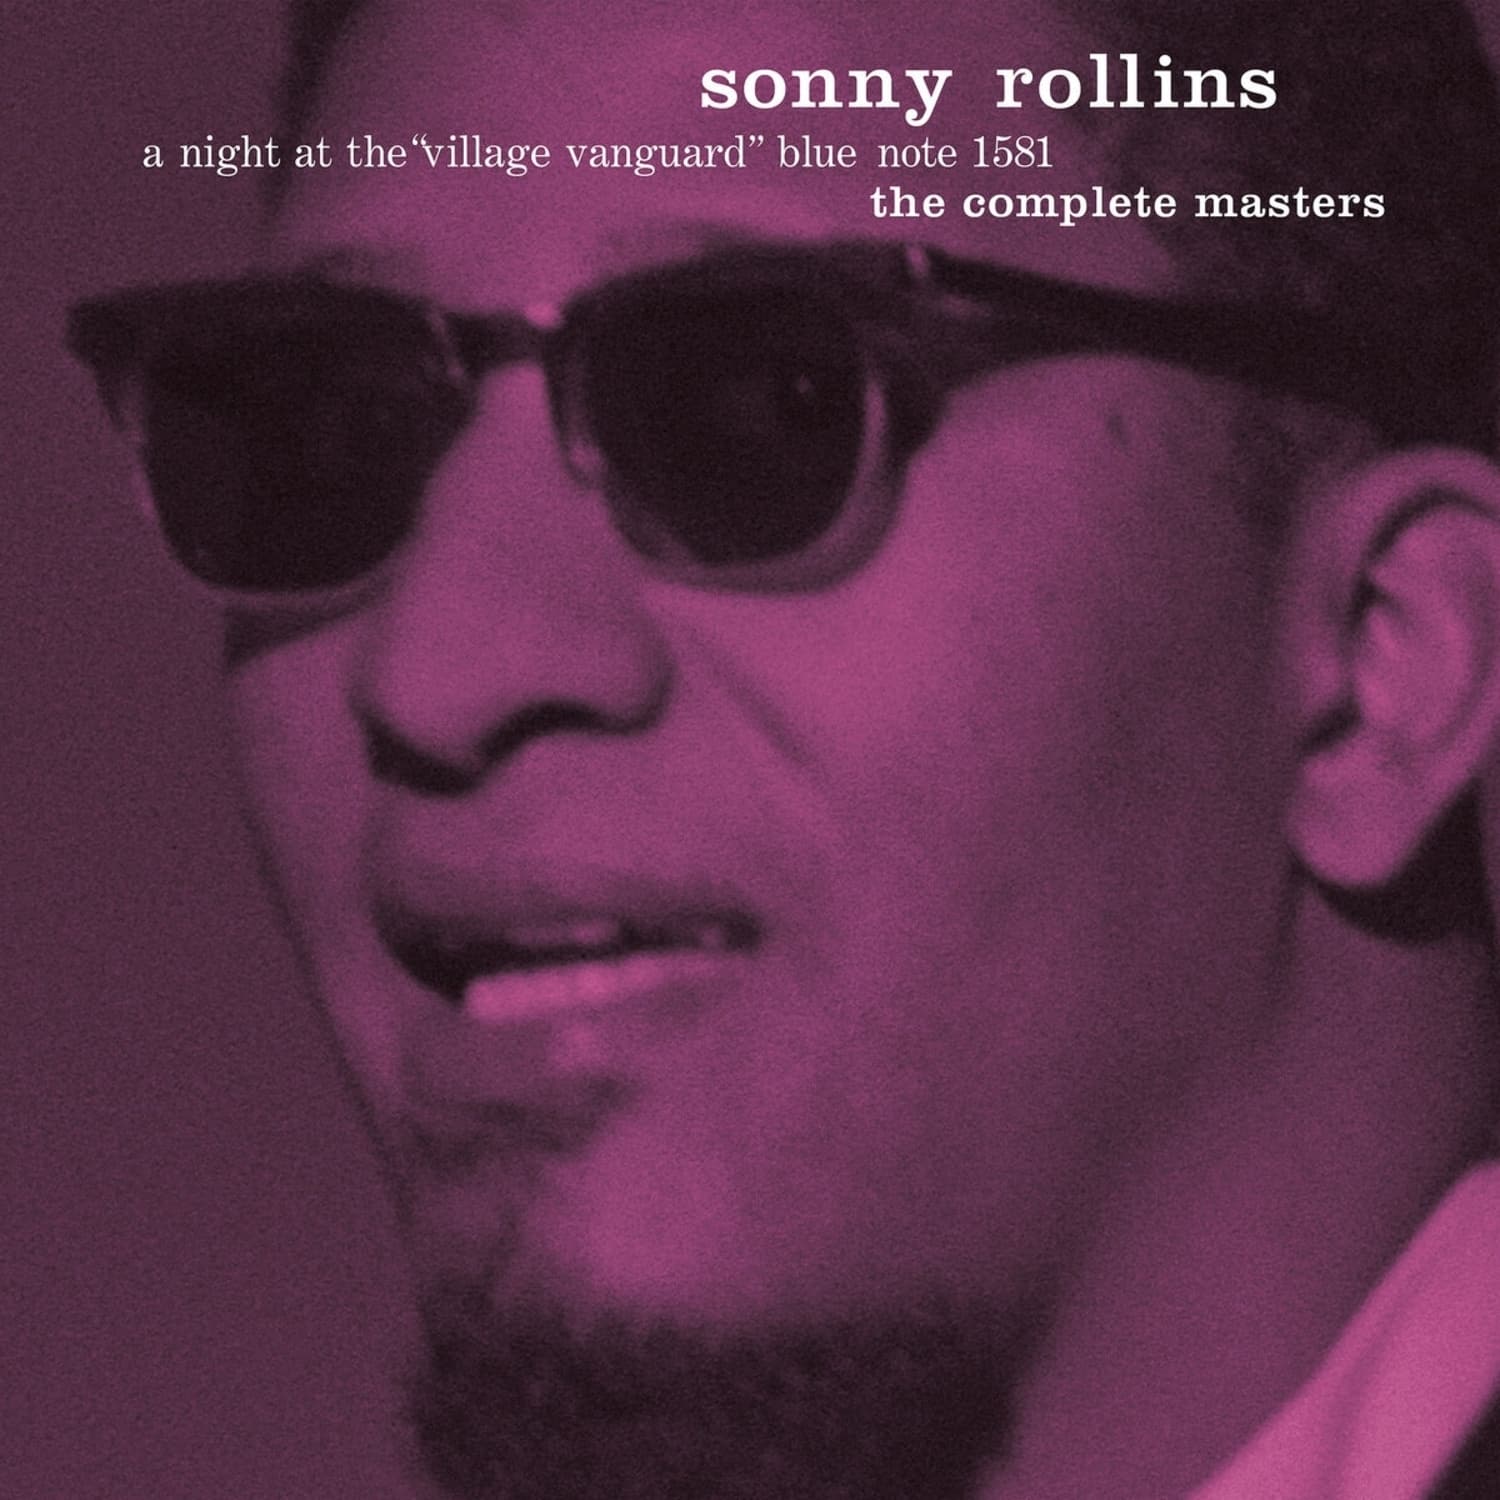 Sony Rollins - THE COMPLETE NIGHT AT THE VILLAGE VANGUARD 